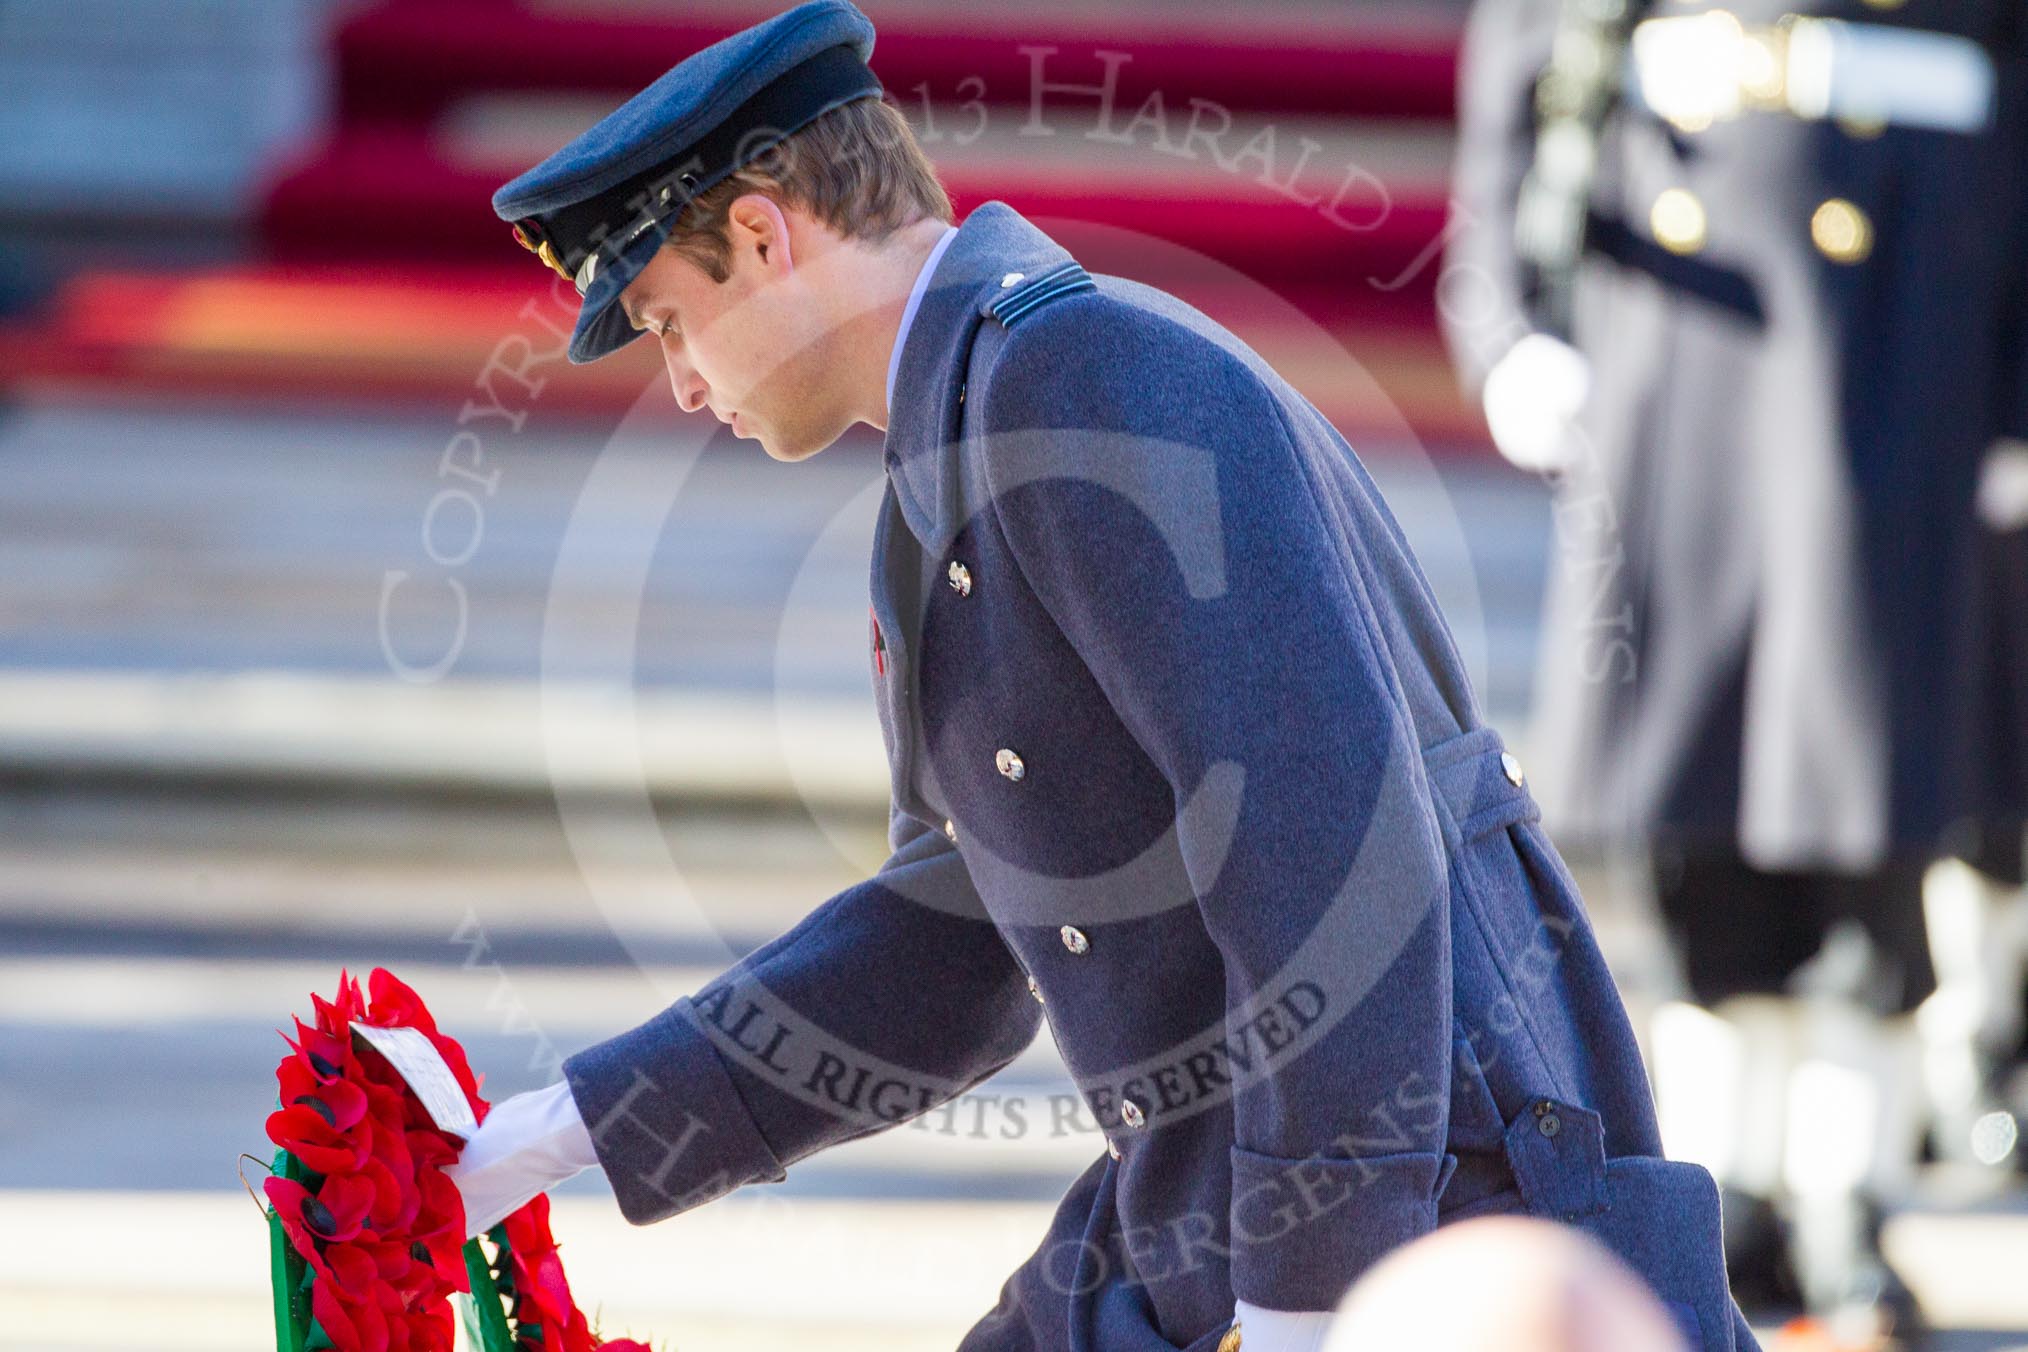 HRH The Duke of Cambridge, about to lay his wreath at the Cenotaph.